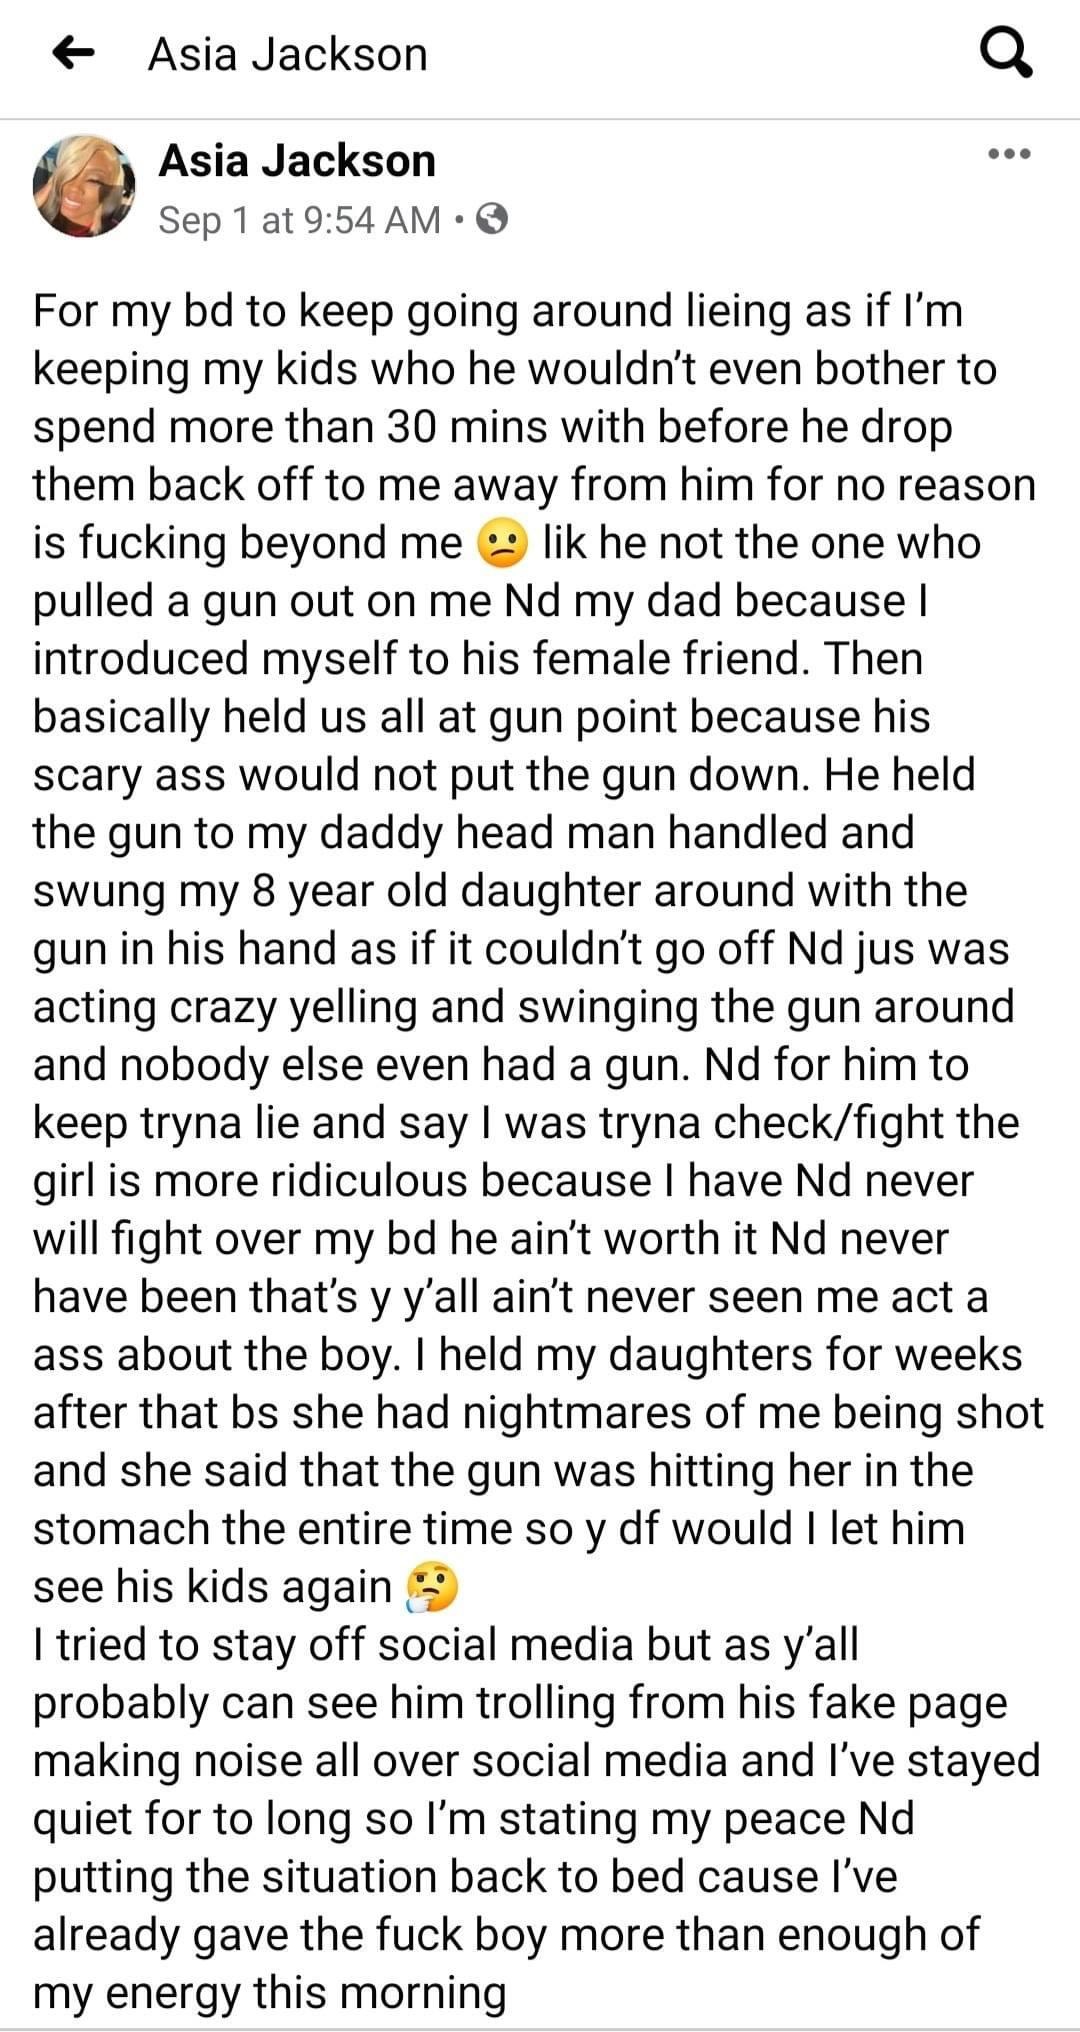 Asia Jackson shared something very personal to Facebook, just over two days ago. She shared that her abusive baby daddy, Ronal E. Dickerson, holding her and her father at gunpoint, holding a gun to her father's head, and in front of their two young daughters, no less. Just eleven days later, Dickerson shot Asia Jones twice in the chest, killing her, causing much outcry.